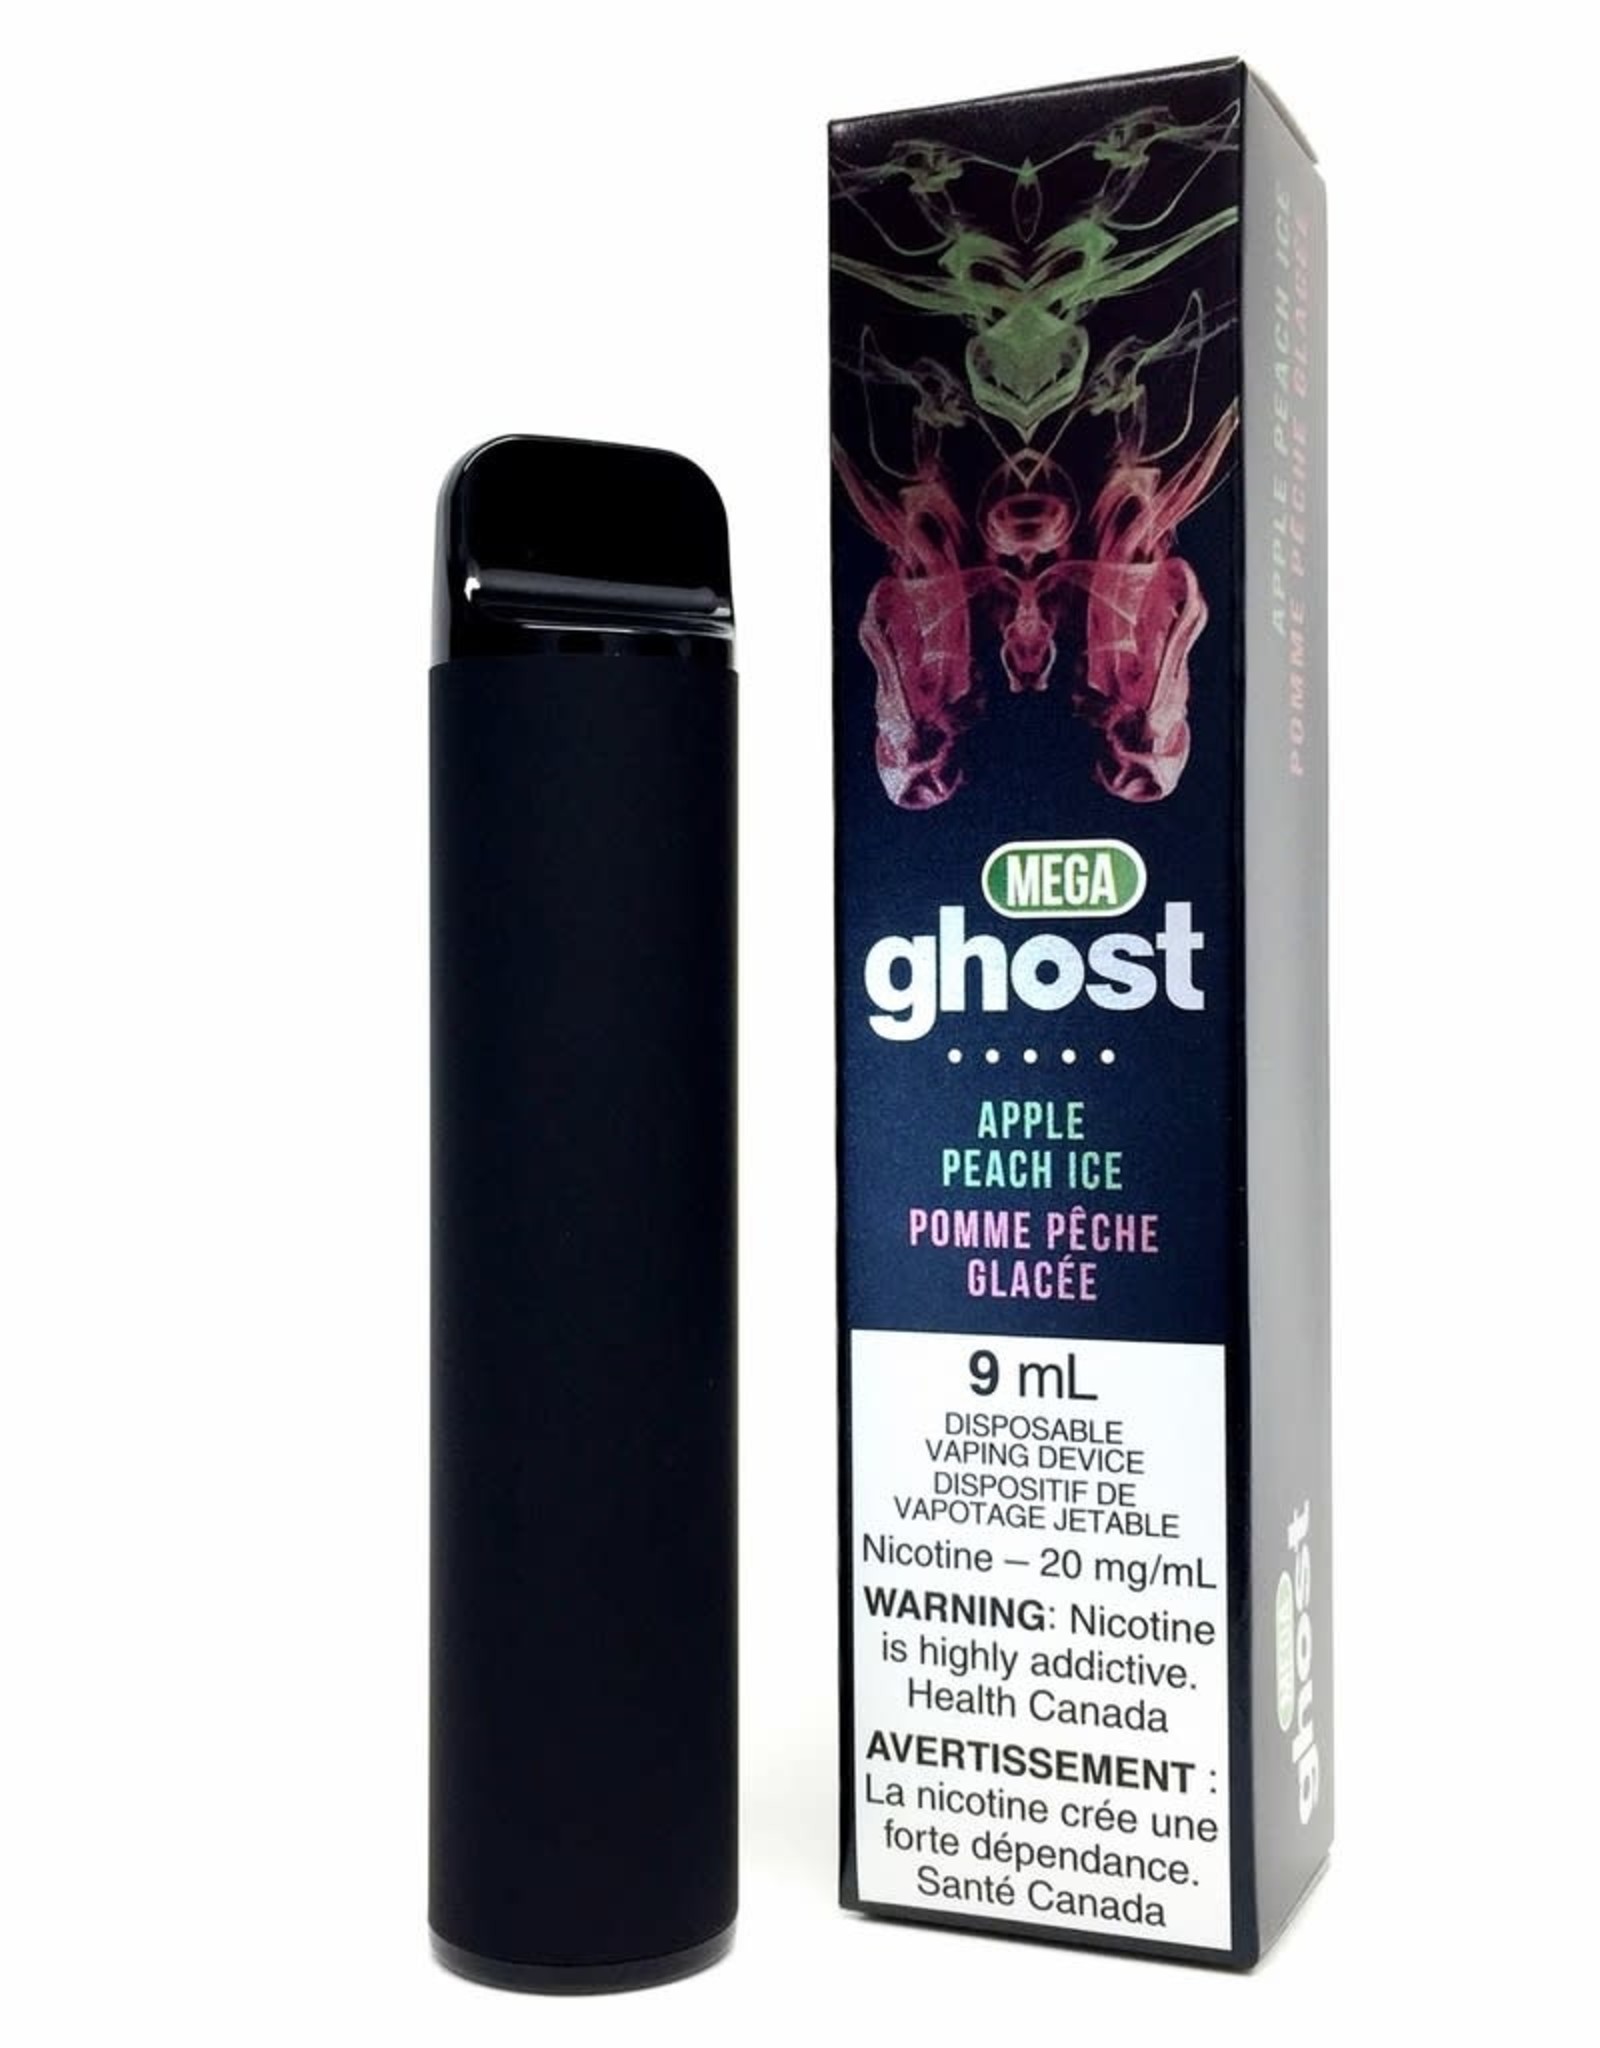 Ghost EXCISE Ghost MEGA 9ml Disposable 3000 Puff (Single)